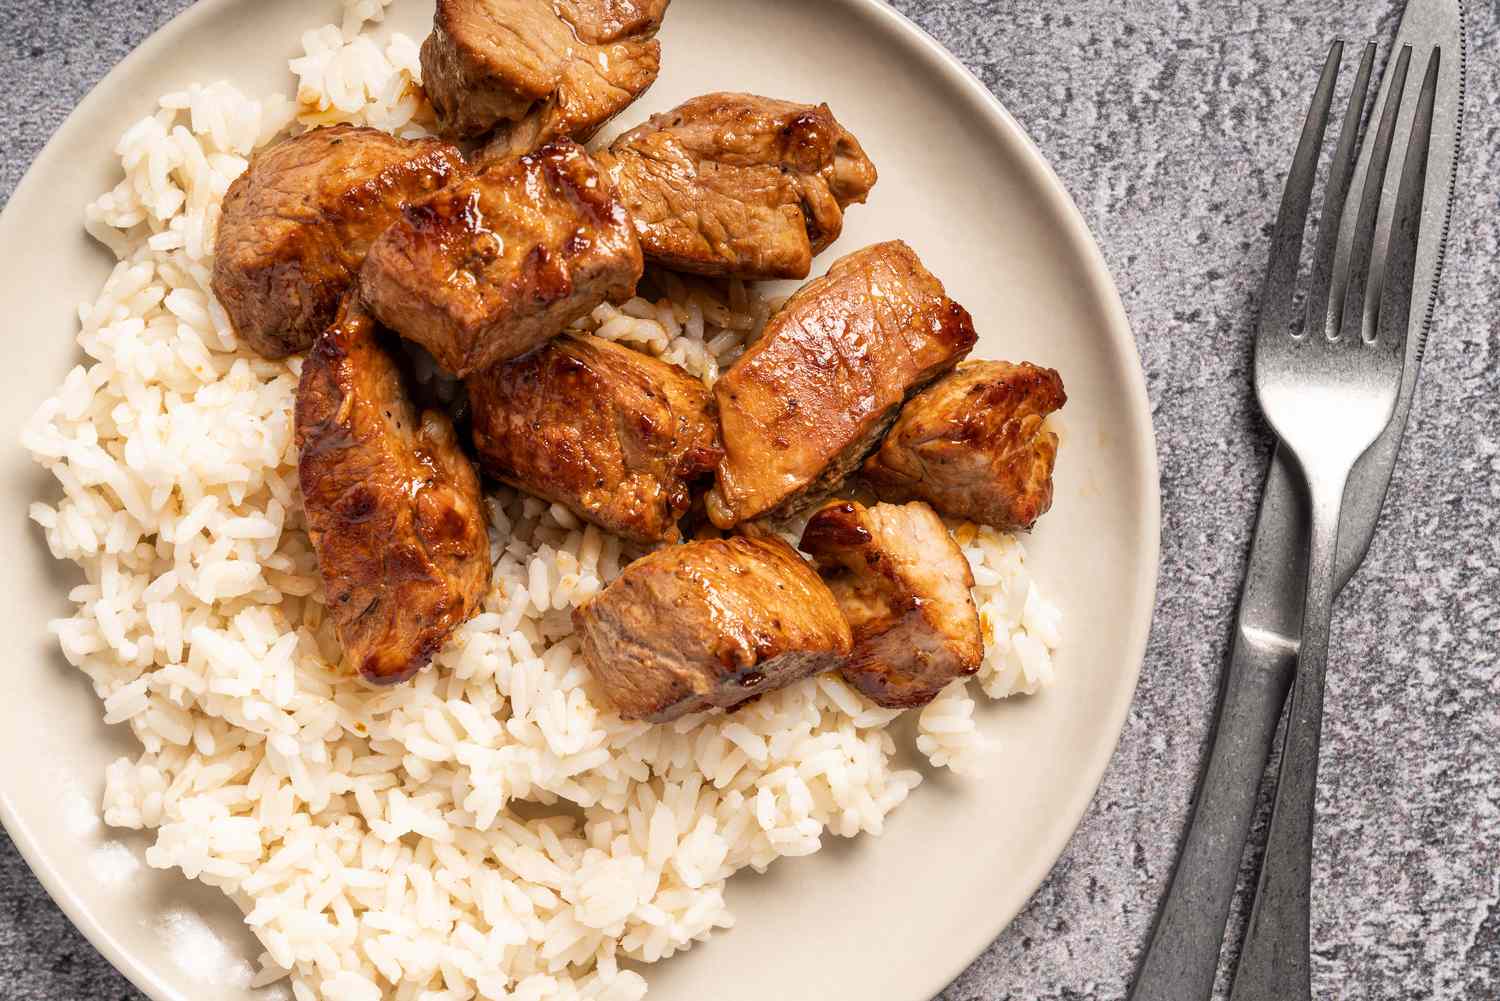 Browned stir-fried pork cubes with rice on a dinner plate